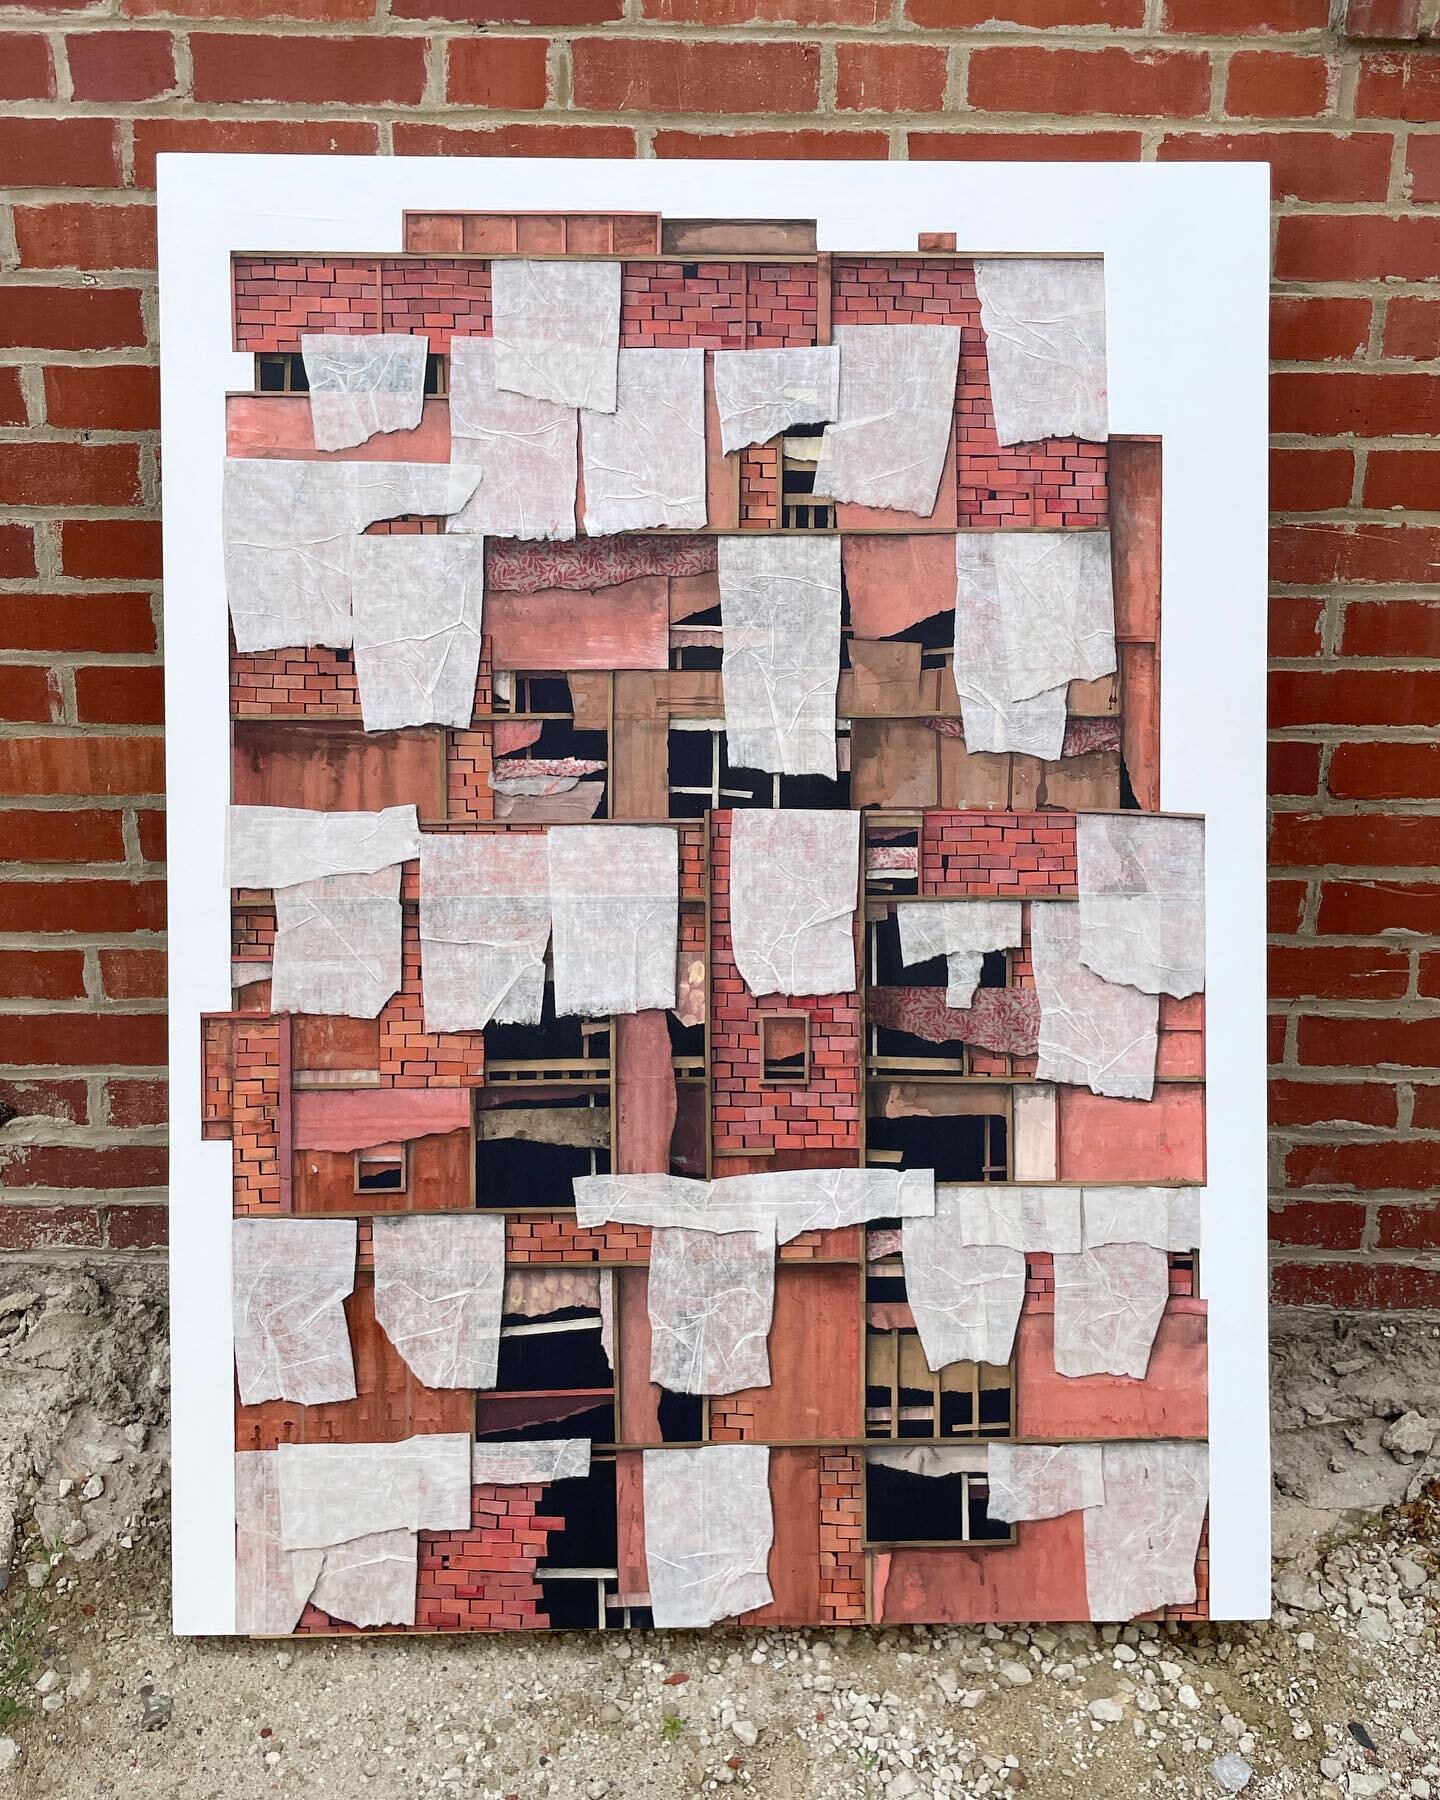 A couple new ghosts completed. The two brick walls behind my studio matched perfectly! 
.
.
.
.
.
.
.
#collageart #collageartist #papercrafts #brickhouse #brickwall #pittsburghartist #archdaily #archlovers #collagear #kolaj #kolajmagazine #kolaż #pit